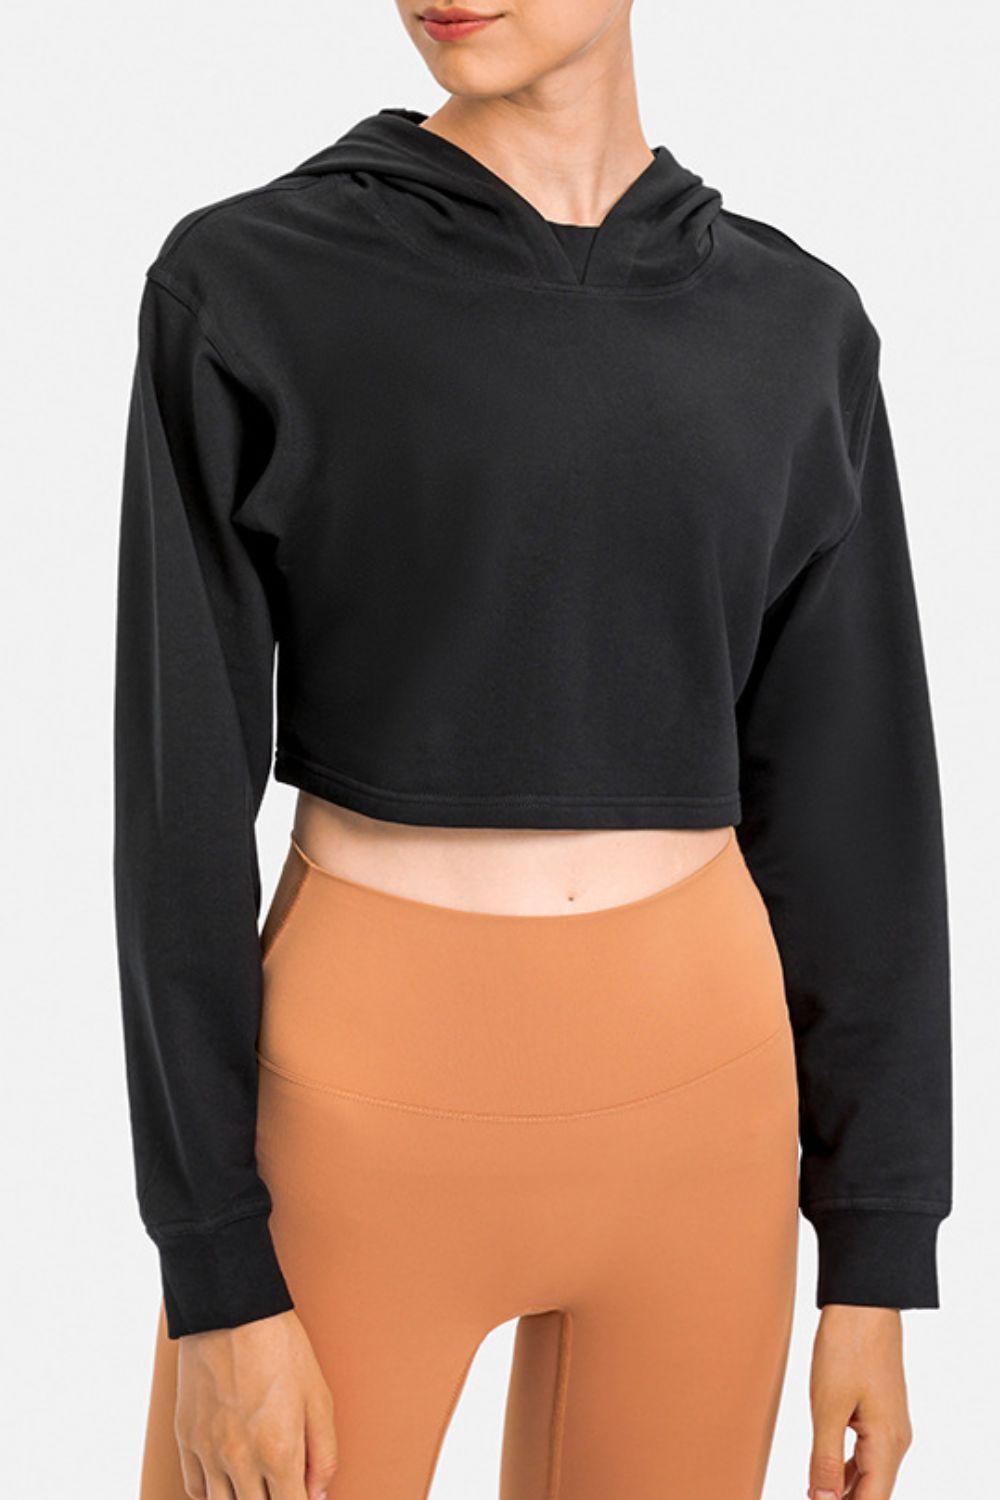 Fit and Bold Cropped Sports Hoodie - MXSTUDIO.COM